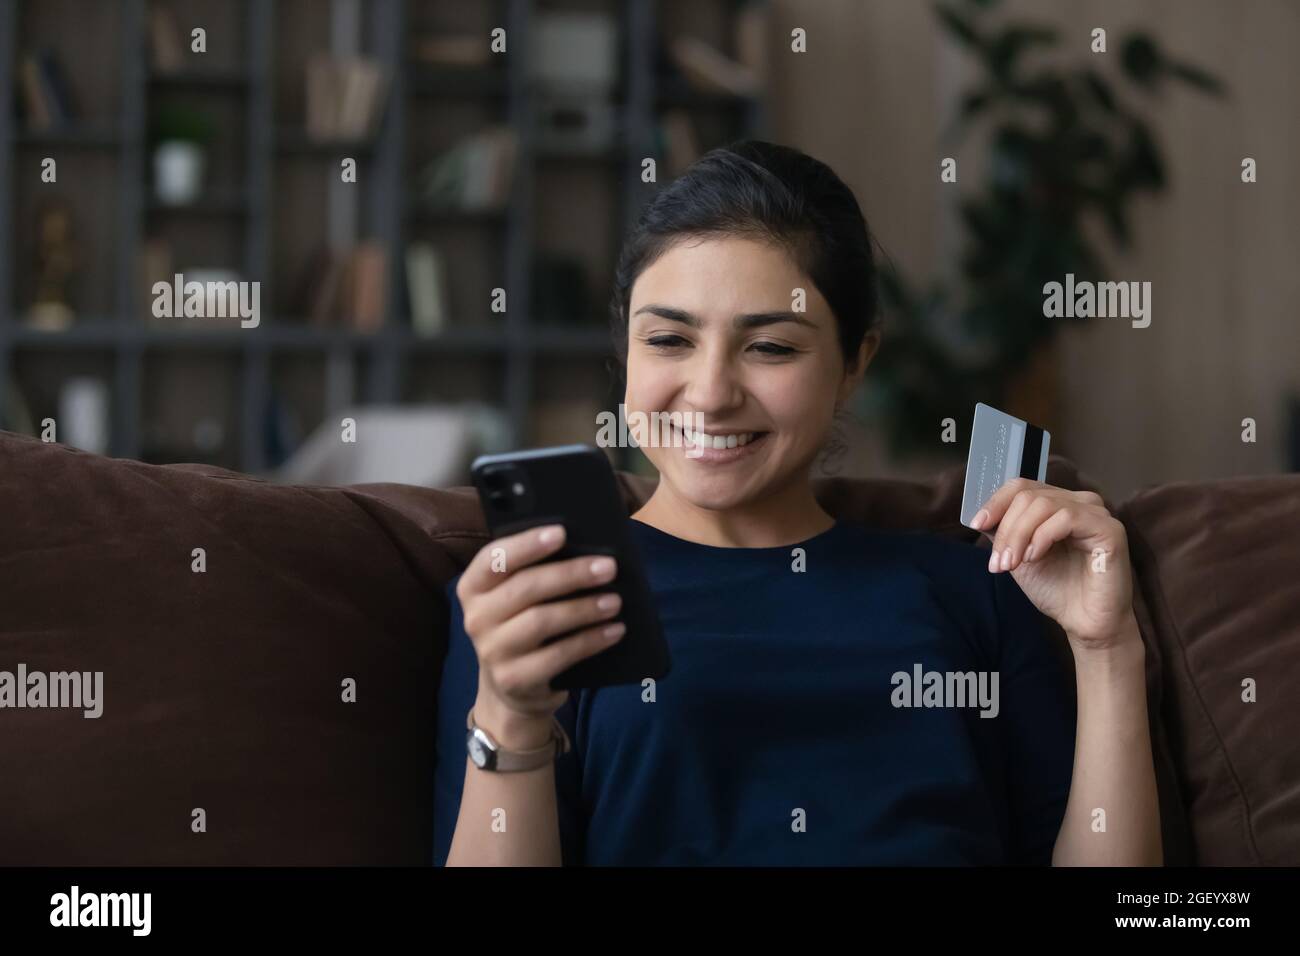 Smiling Indian female buyer shopping online on smartphone Stock Photo